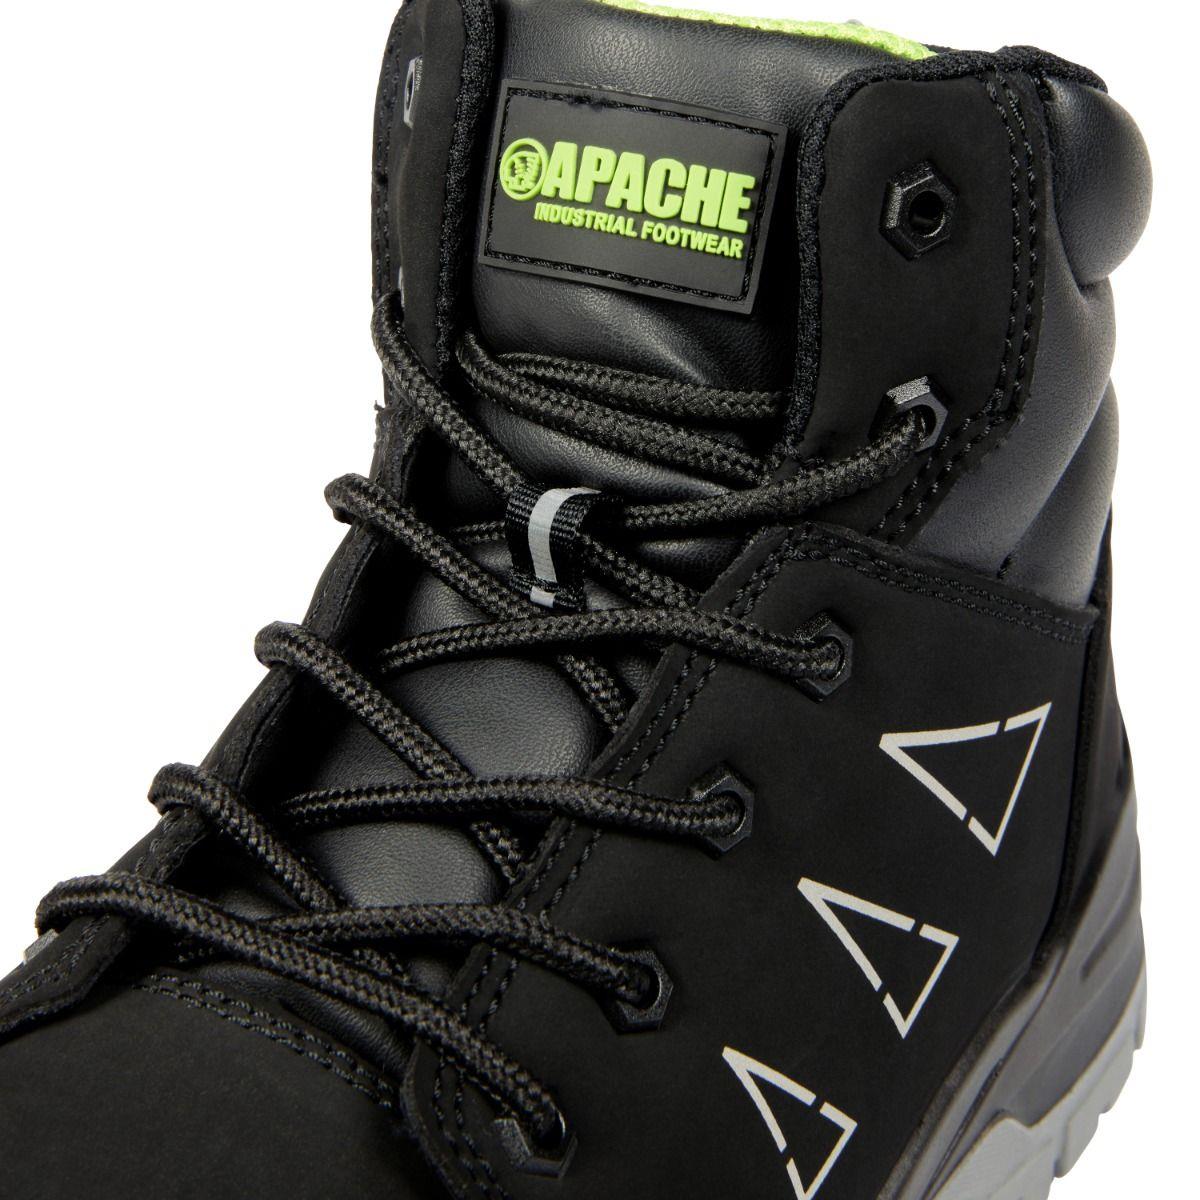 Apache Armstrong S3 water resistant non-metallic wide fit work safety boots